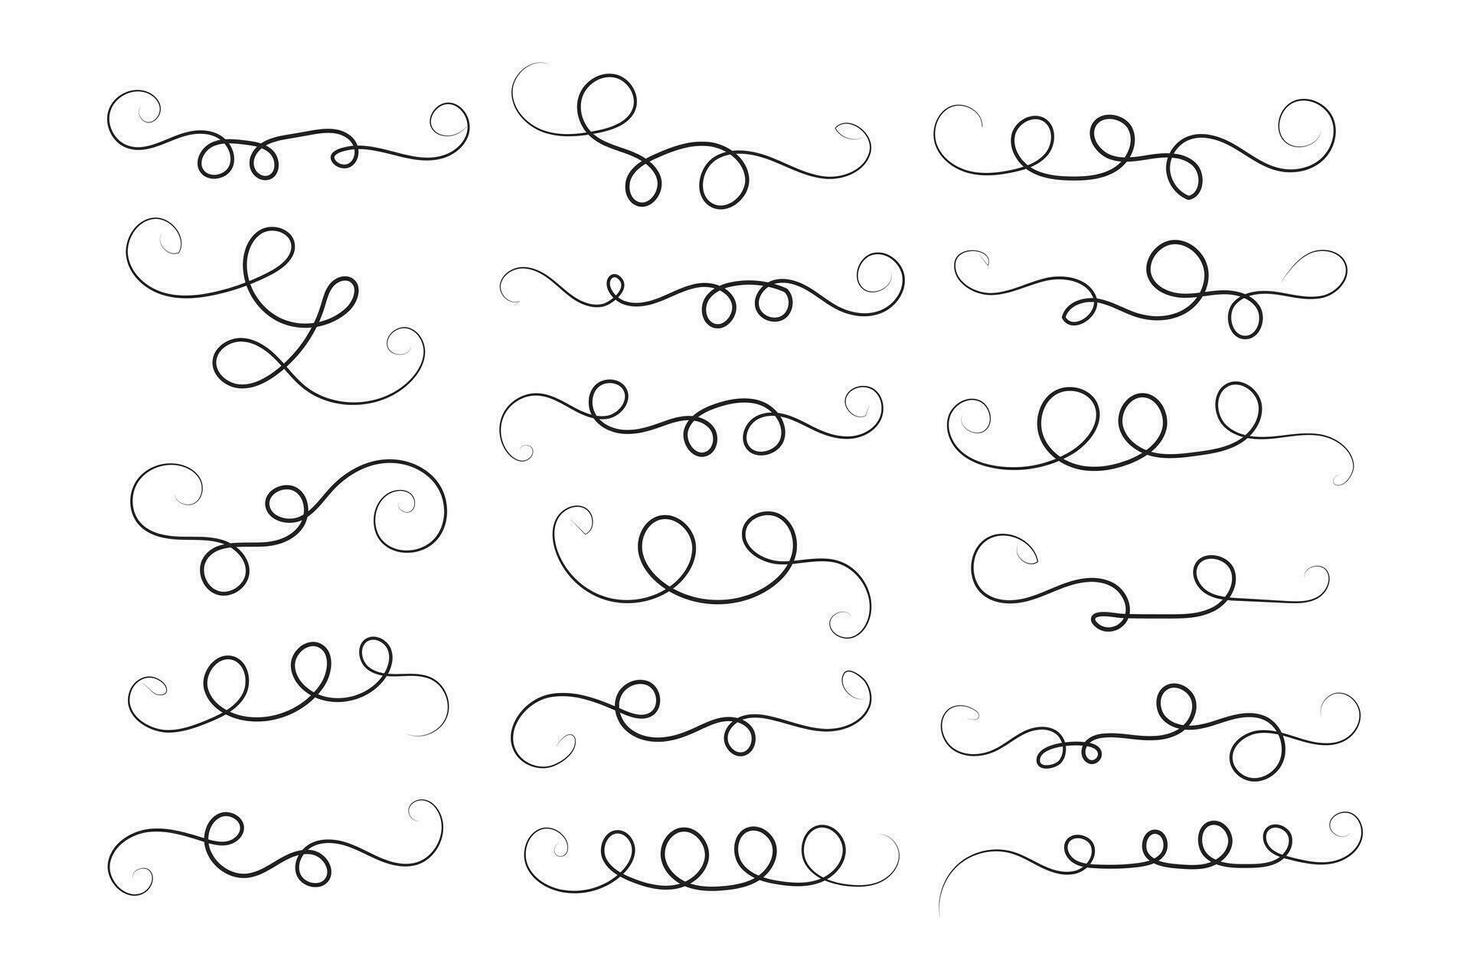 Vintage Filigree Swirls, calligraphy font style Decorative Elements, Text Ornaments curly thin line swings swashes, Flourishes Swirls, text divider, flourish Swirl ornament stroke, scroll design vector